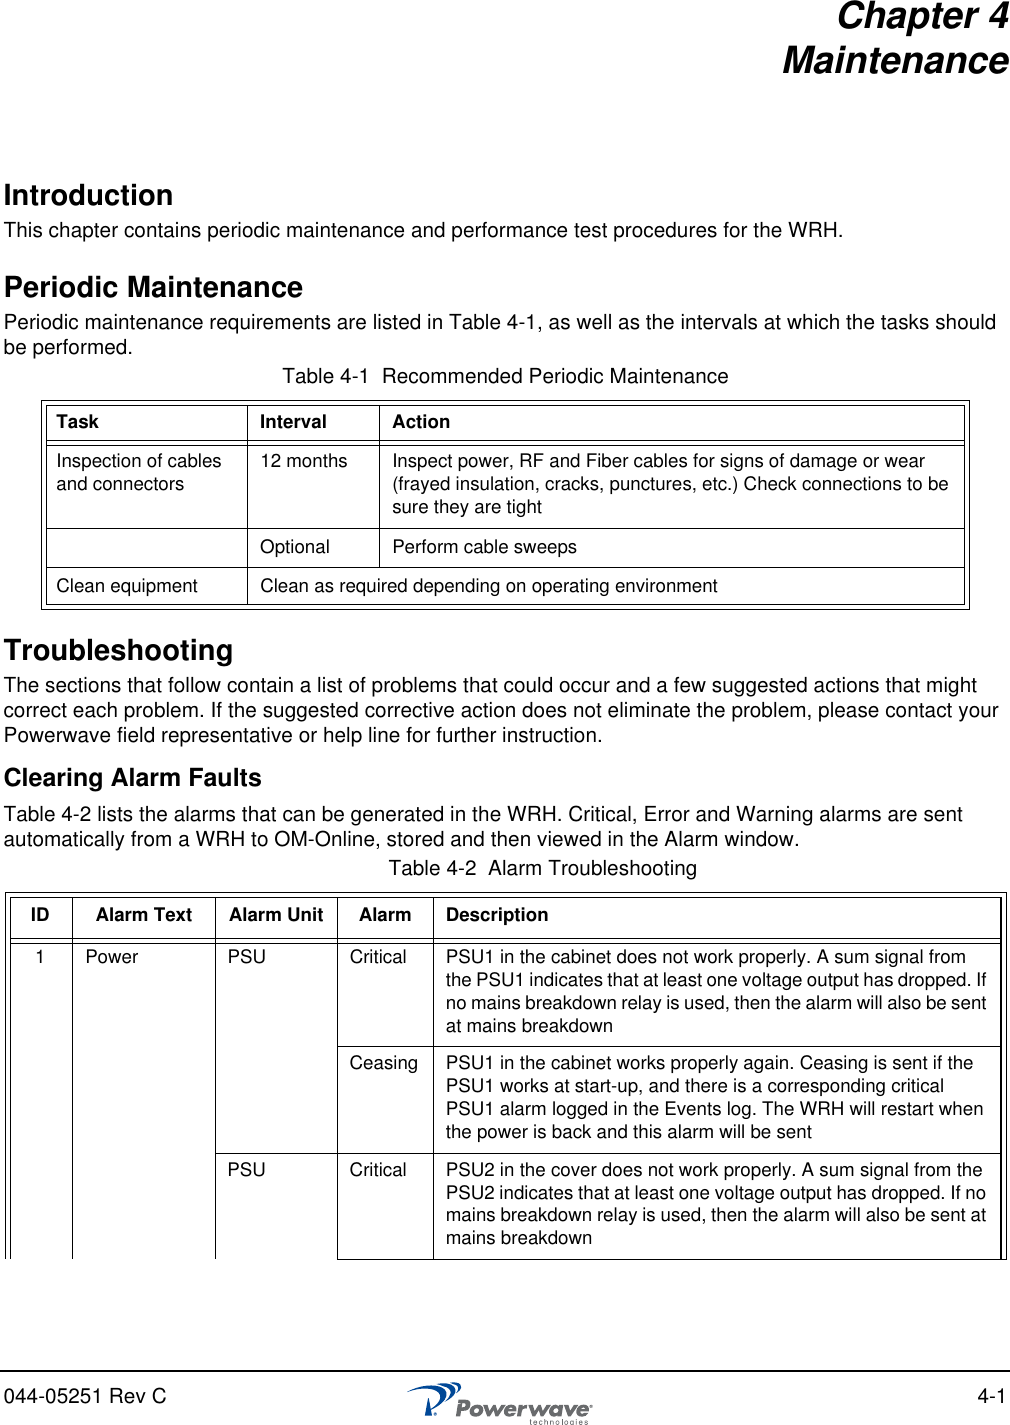 044-05251 Rev C 4-1Chapter 4 MaintenanceIntroductionThis chapter contains periodic maintenance and performance test procedures for the WRH.Periodic MaintenancePeriodic maintenance requirements are listed in Table 4-1, as well as the intervals at which the tasks should be performed.TroubleshootingThe sections that follow contain a list of problems that could occur and a few suggested actions that might correct each problem. If the suggested corrective action does not eliminate the problem, please contact your Powerwave field representative or help line for further instruction.Clearing Alarm FaultsTable 4-2 lists the alarms that can be generated in the WRH. Critical, Error and Warning alarms are sent automatically from a WRH to OM-Online, stored and then viewed in the Alarm window.Table 4-1  Recommended Periodic MaintenanceTask Interval ActionInspection of cables and connectors 12 months Inspect power, RF and Fiber cables for signs of damage or wear (frayed insulation, cracks, punctures, etc.) Check connections to be sure they are tightOptional Perform cable sweepsClean equipment Clean as required depending on operating environmentTable 4-2  Alarm Troubleshooting ID Alarm Text Alarm Unit Alarm Description1Power PSU Critical PSU1 in the cabinet does not work properly. A sum signal from the PSU1 indicates that at least one voltage output has dropped. If no mains breakdown relay is used, then the alarm will also be sent at mains breakdownCeasing PSU1 in the cabinet works properly again. Ceasing is sent if the PSU1 works at start-up, and there is a corresponding critical PSU1 alarm logged in the Events log. The WRH will restart when the power is back and this alarm will be sentPSU Critical PSU2 in the cover does not work properly. A sum signal from the PSU2 indicates that at least one voltage output has dropped. If no mains breakdown relay is used, then the alarm will also be sent at mains breakdown